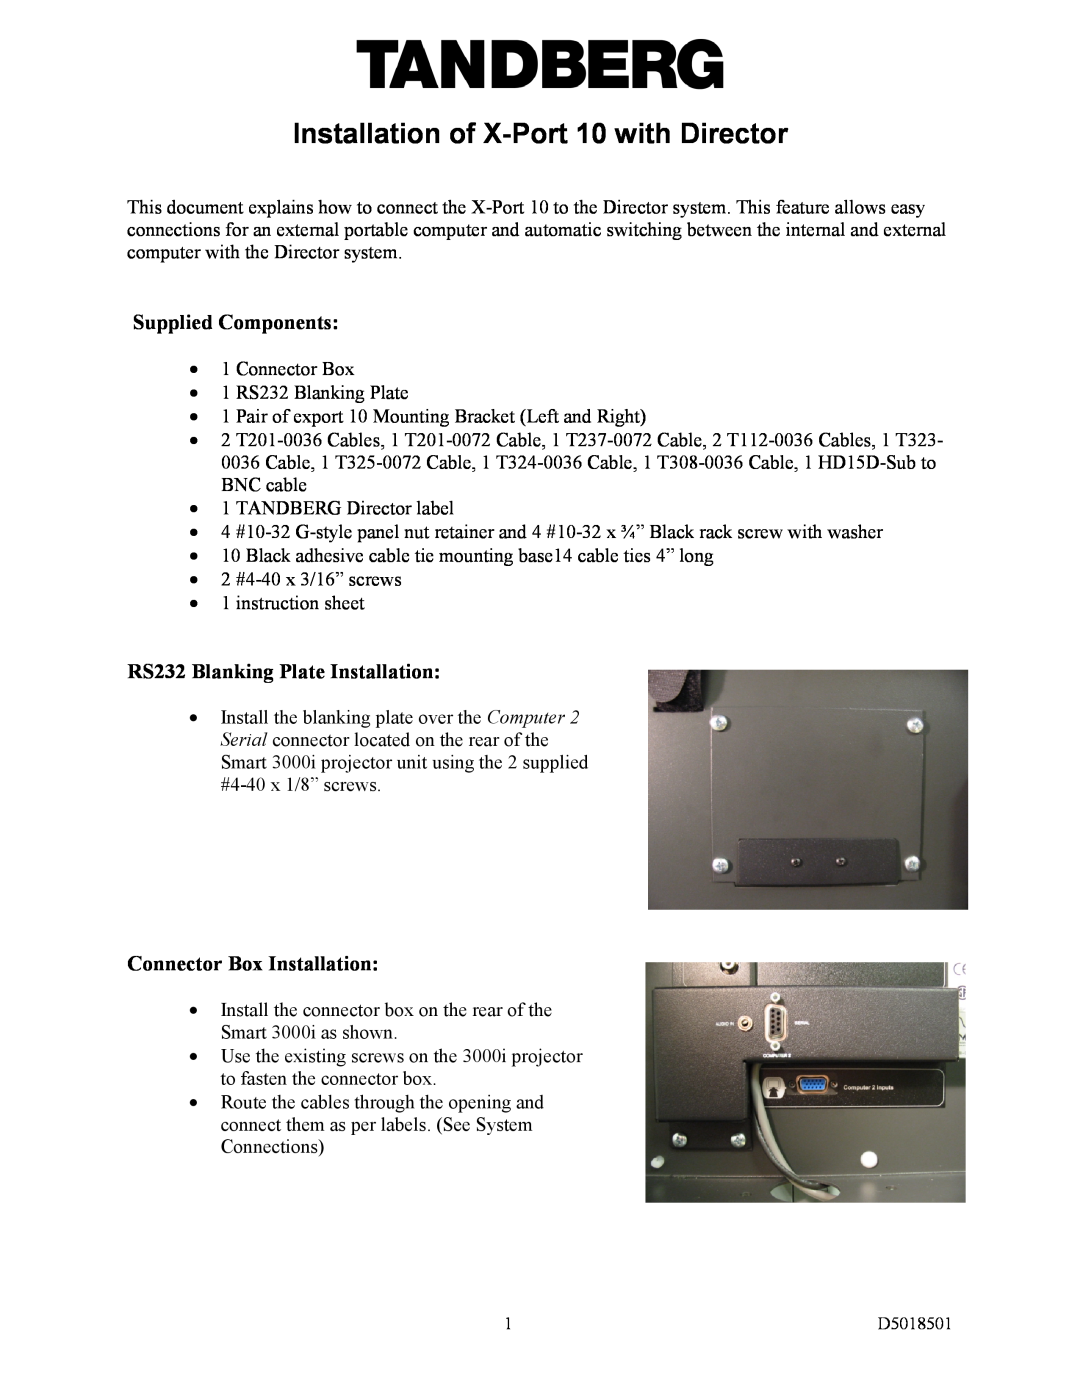 TANDBERG D5018501 instruction sheet Supplied Components, RS232 Blanking Plate Installation, Connector Box Installation 